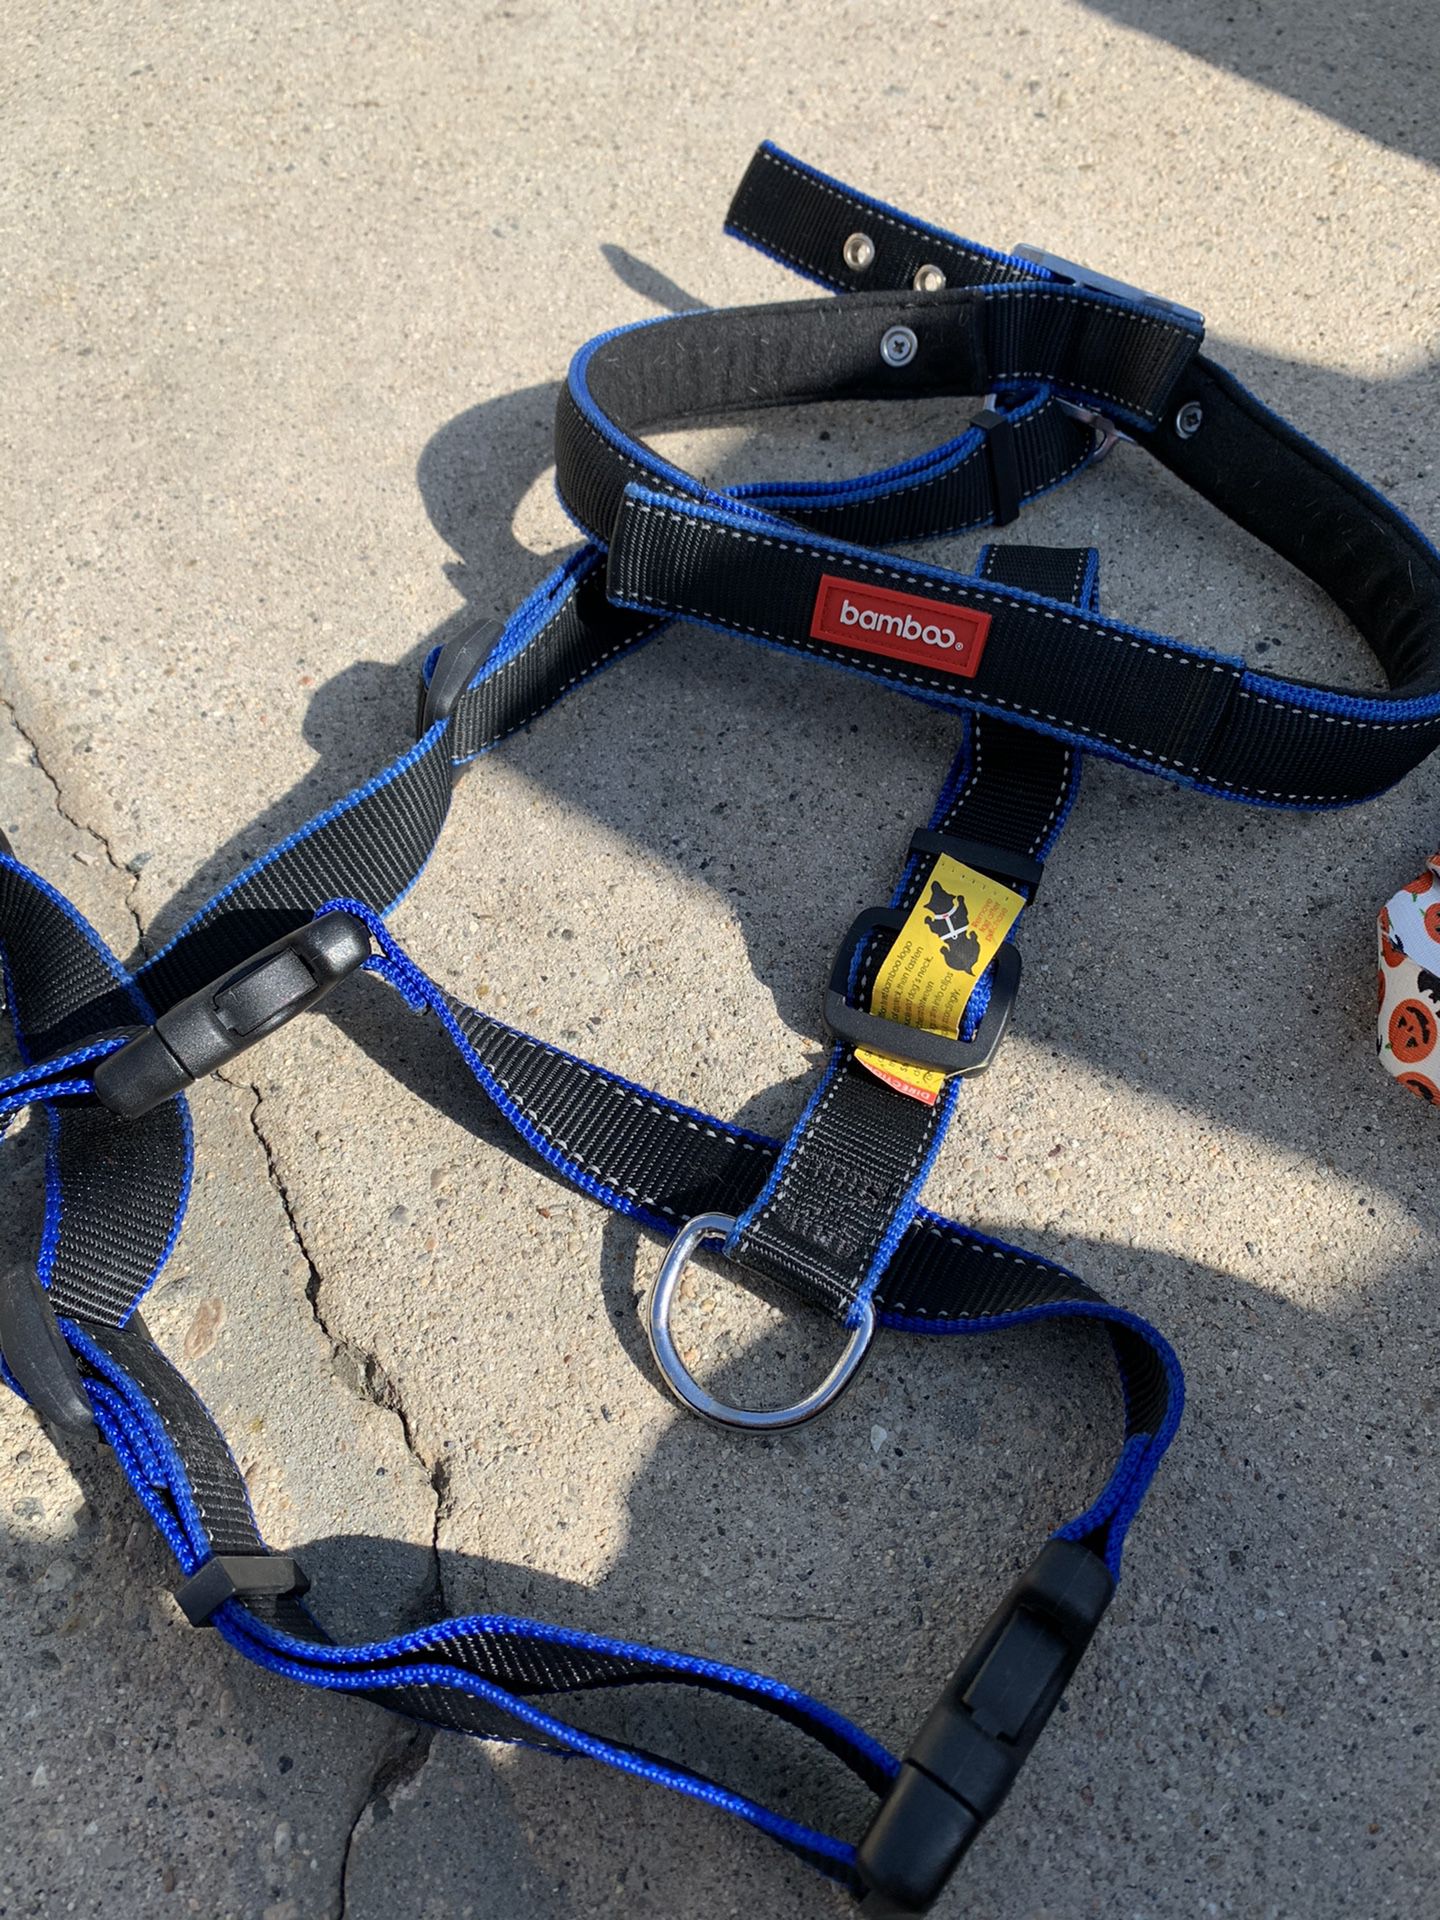 Dog items- harness for large dog, collars and muzzle